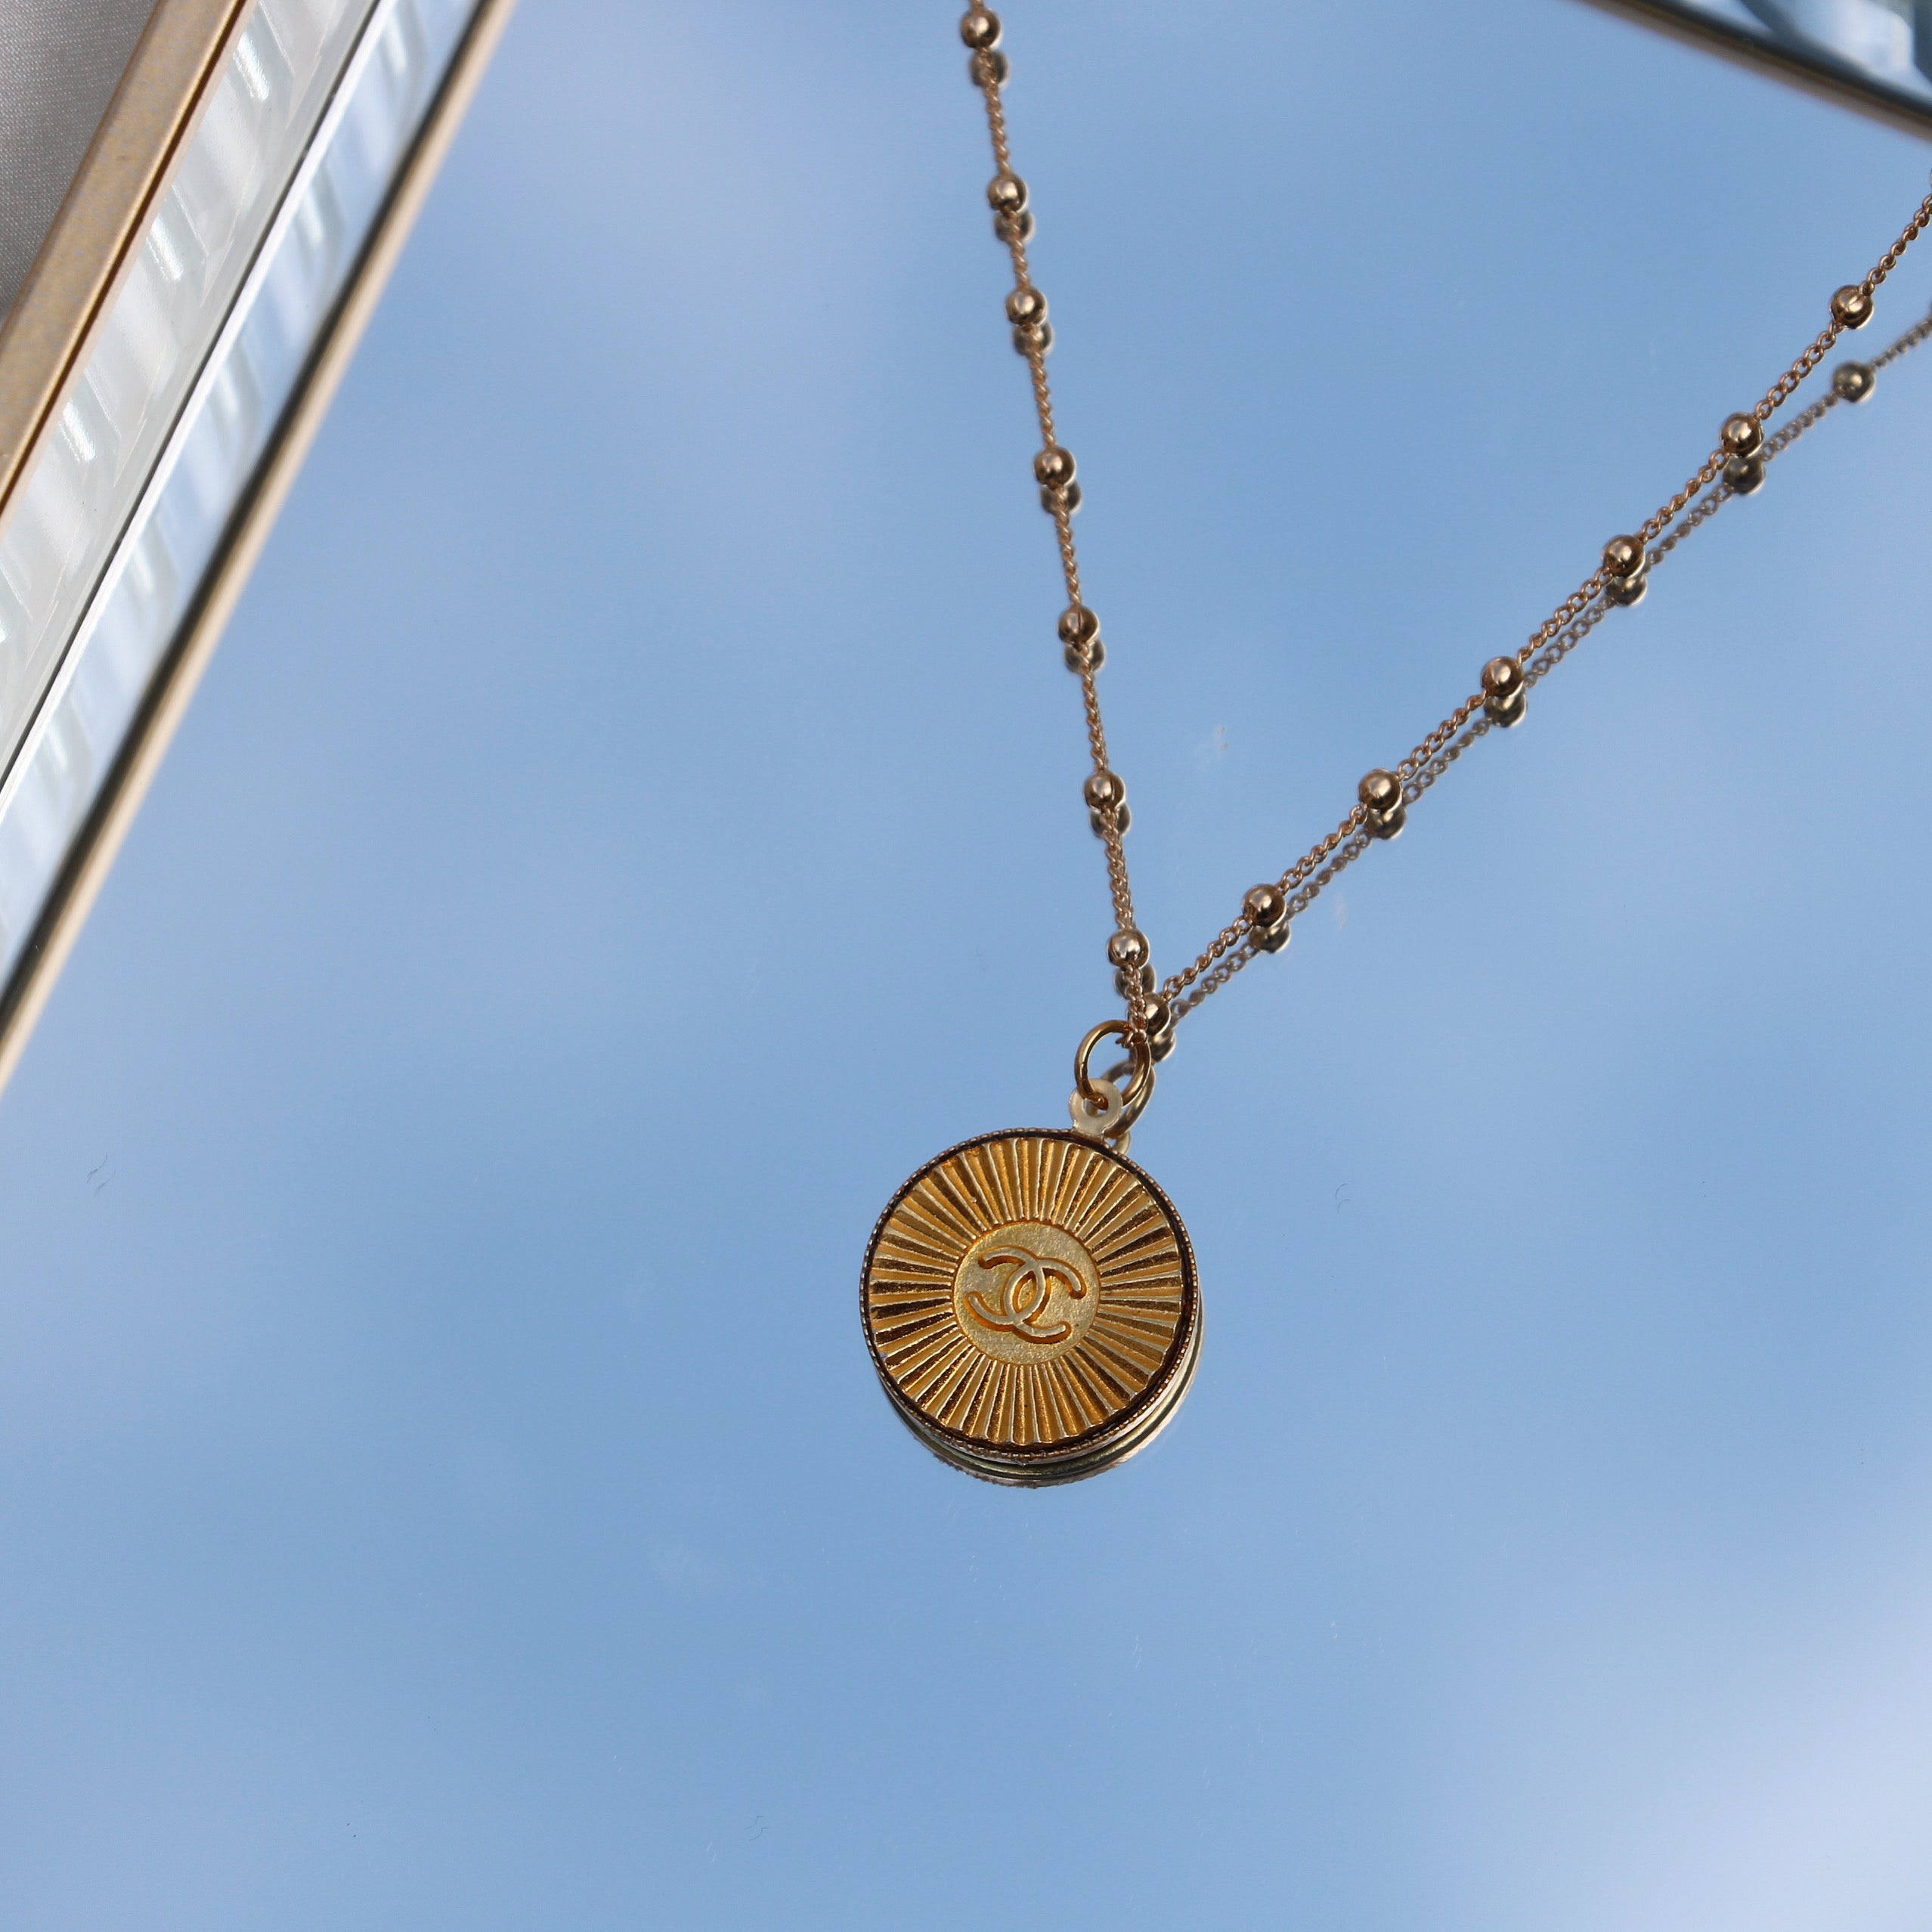 COLLIER UPCYCLÉ CHANEL SOLEIL